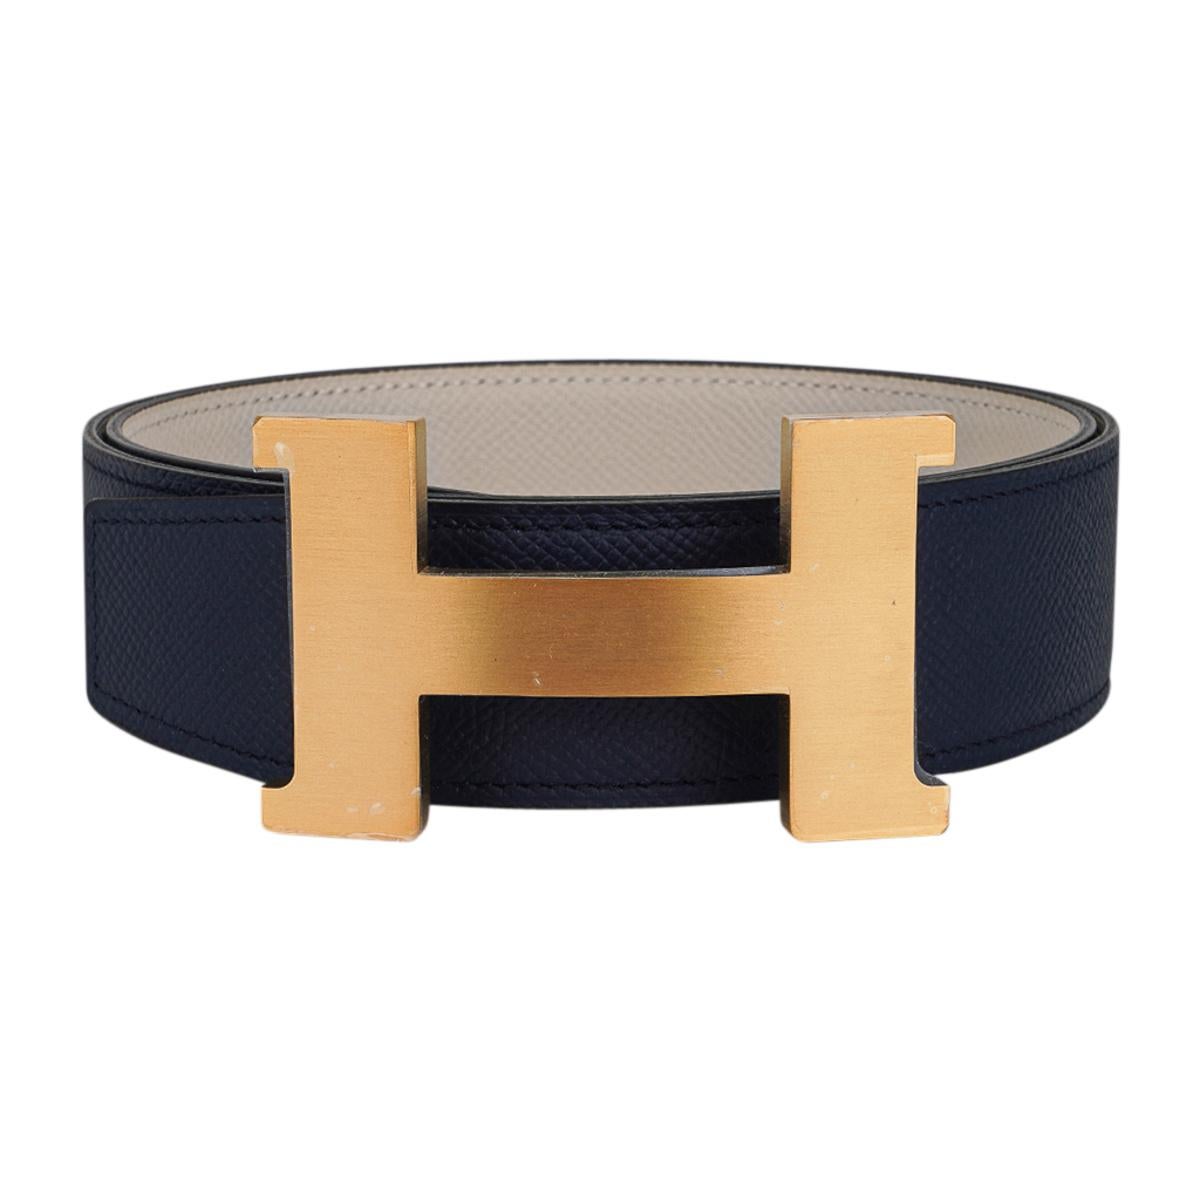 Mightychic offers an Hermes Constance 42 belt features reversible Navy to Craie Epsom Leather.  
Fabulous over sized brushed Gold signature H buckle.  
Now a retired size, this is sure to become a collectors treasure. 
Signature HERMES PARIS MADE IN